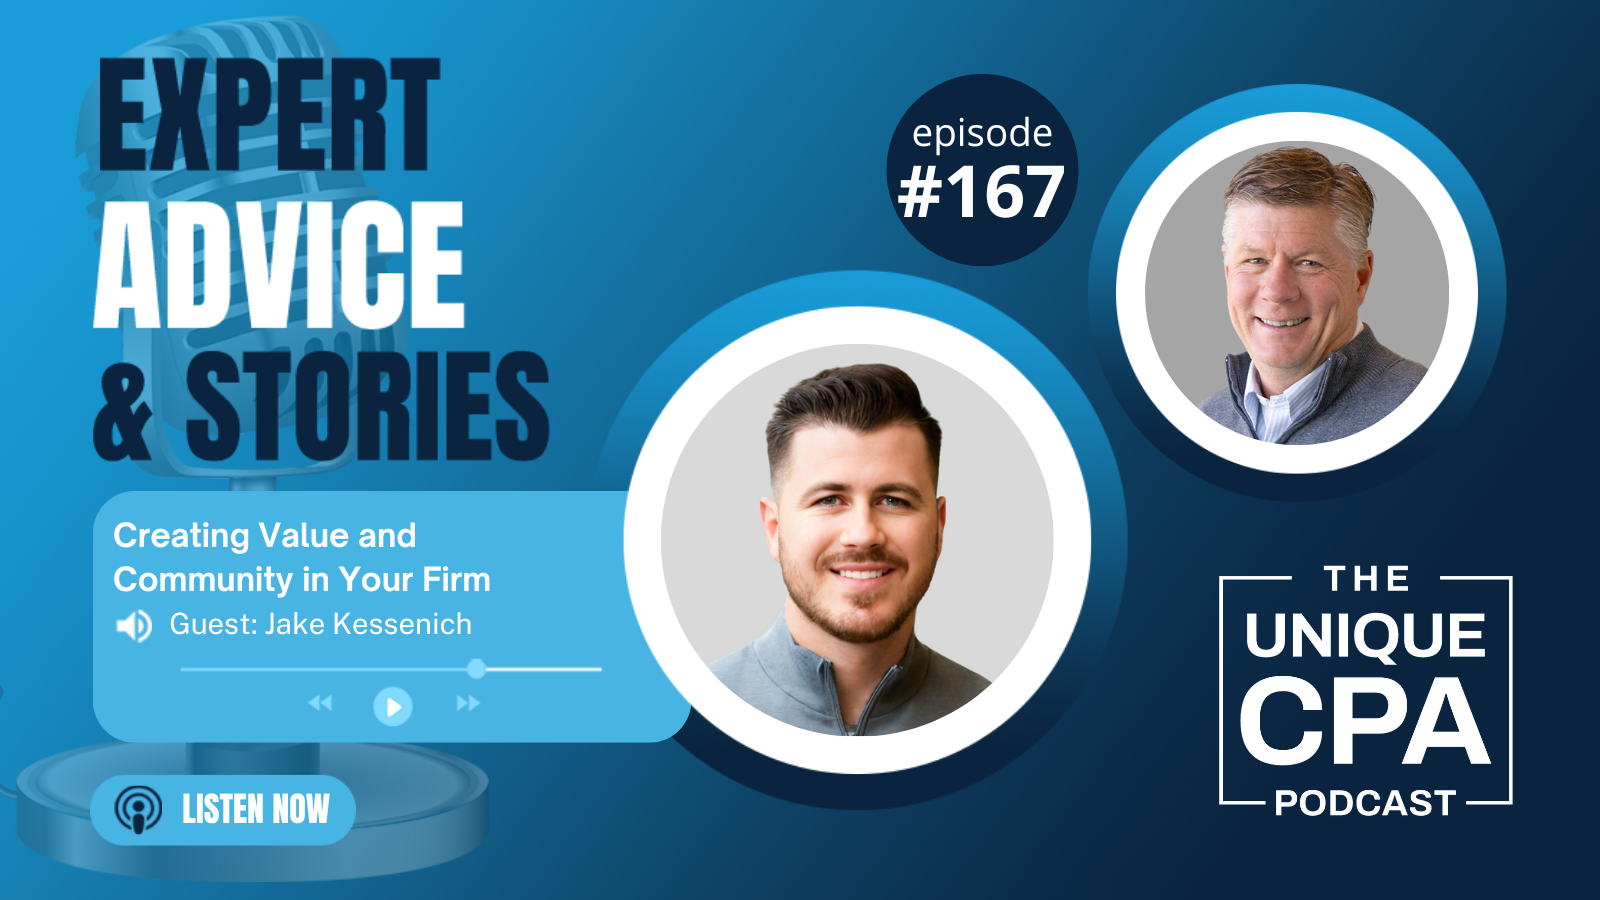 Unique Cpa Featured Image Ep 167 Jake Kessenich - Creating Value And Community In Your Firm - Tri-Merit